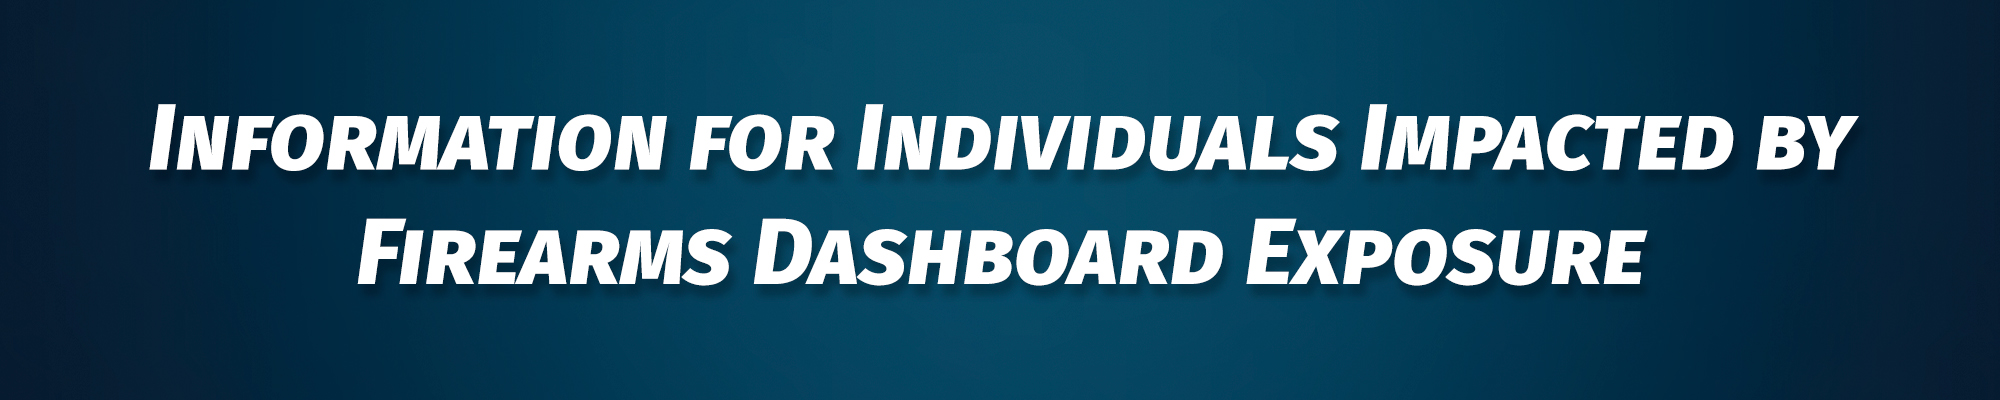 Information for Individuals Impacted by Firearms Dashboard Exposure